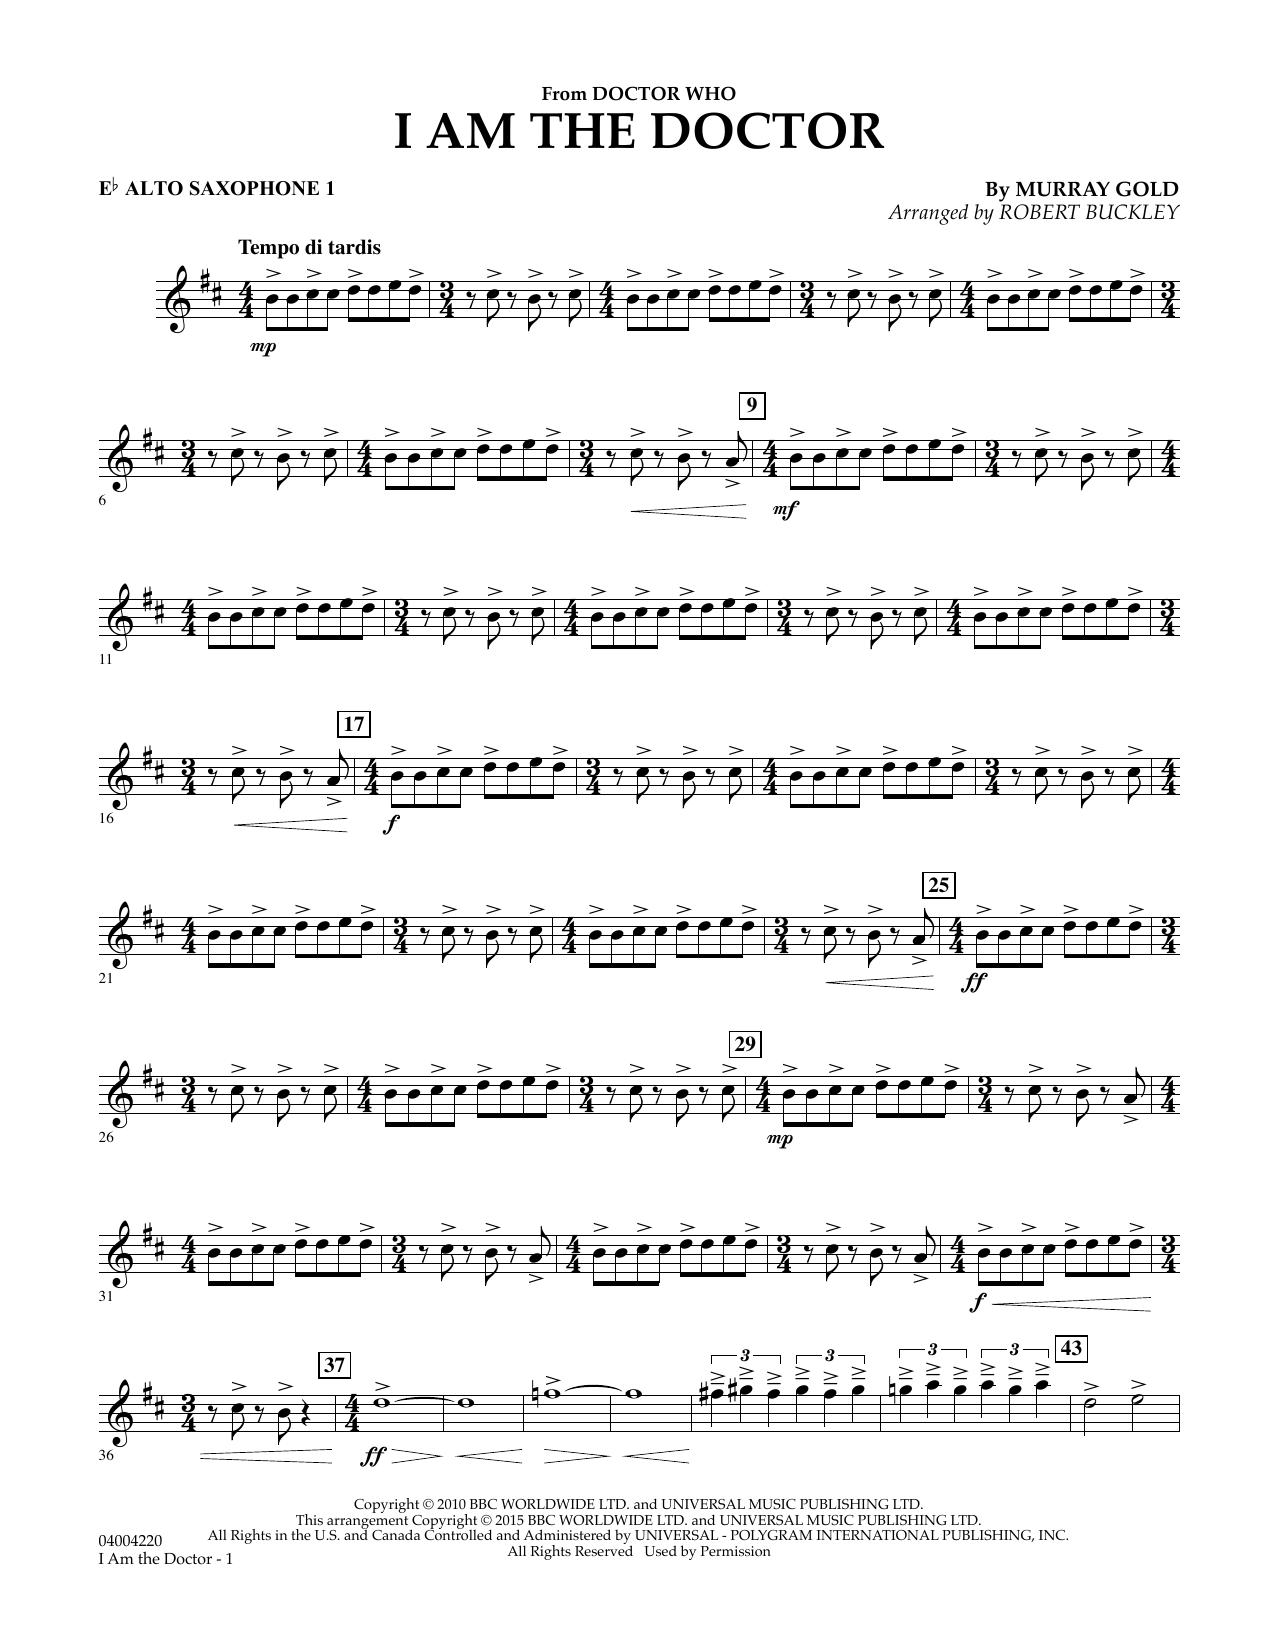 Robert Buckley I Am the Doctor (from Doctor Who) - Eb Alto Saxophone 1 sheet music notes and chords. Download Printable PDF.